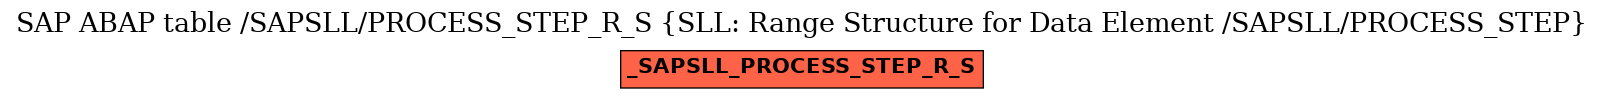 E-R Diagram for table /SAPSLL/PROCESS_STEP_R_S (SLL: Range Structure for Data Element /SAPSLL/PROCESS_STEP)